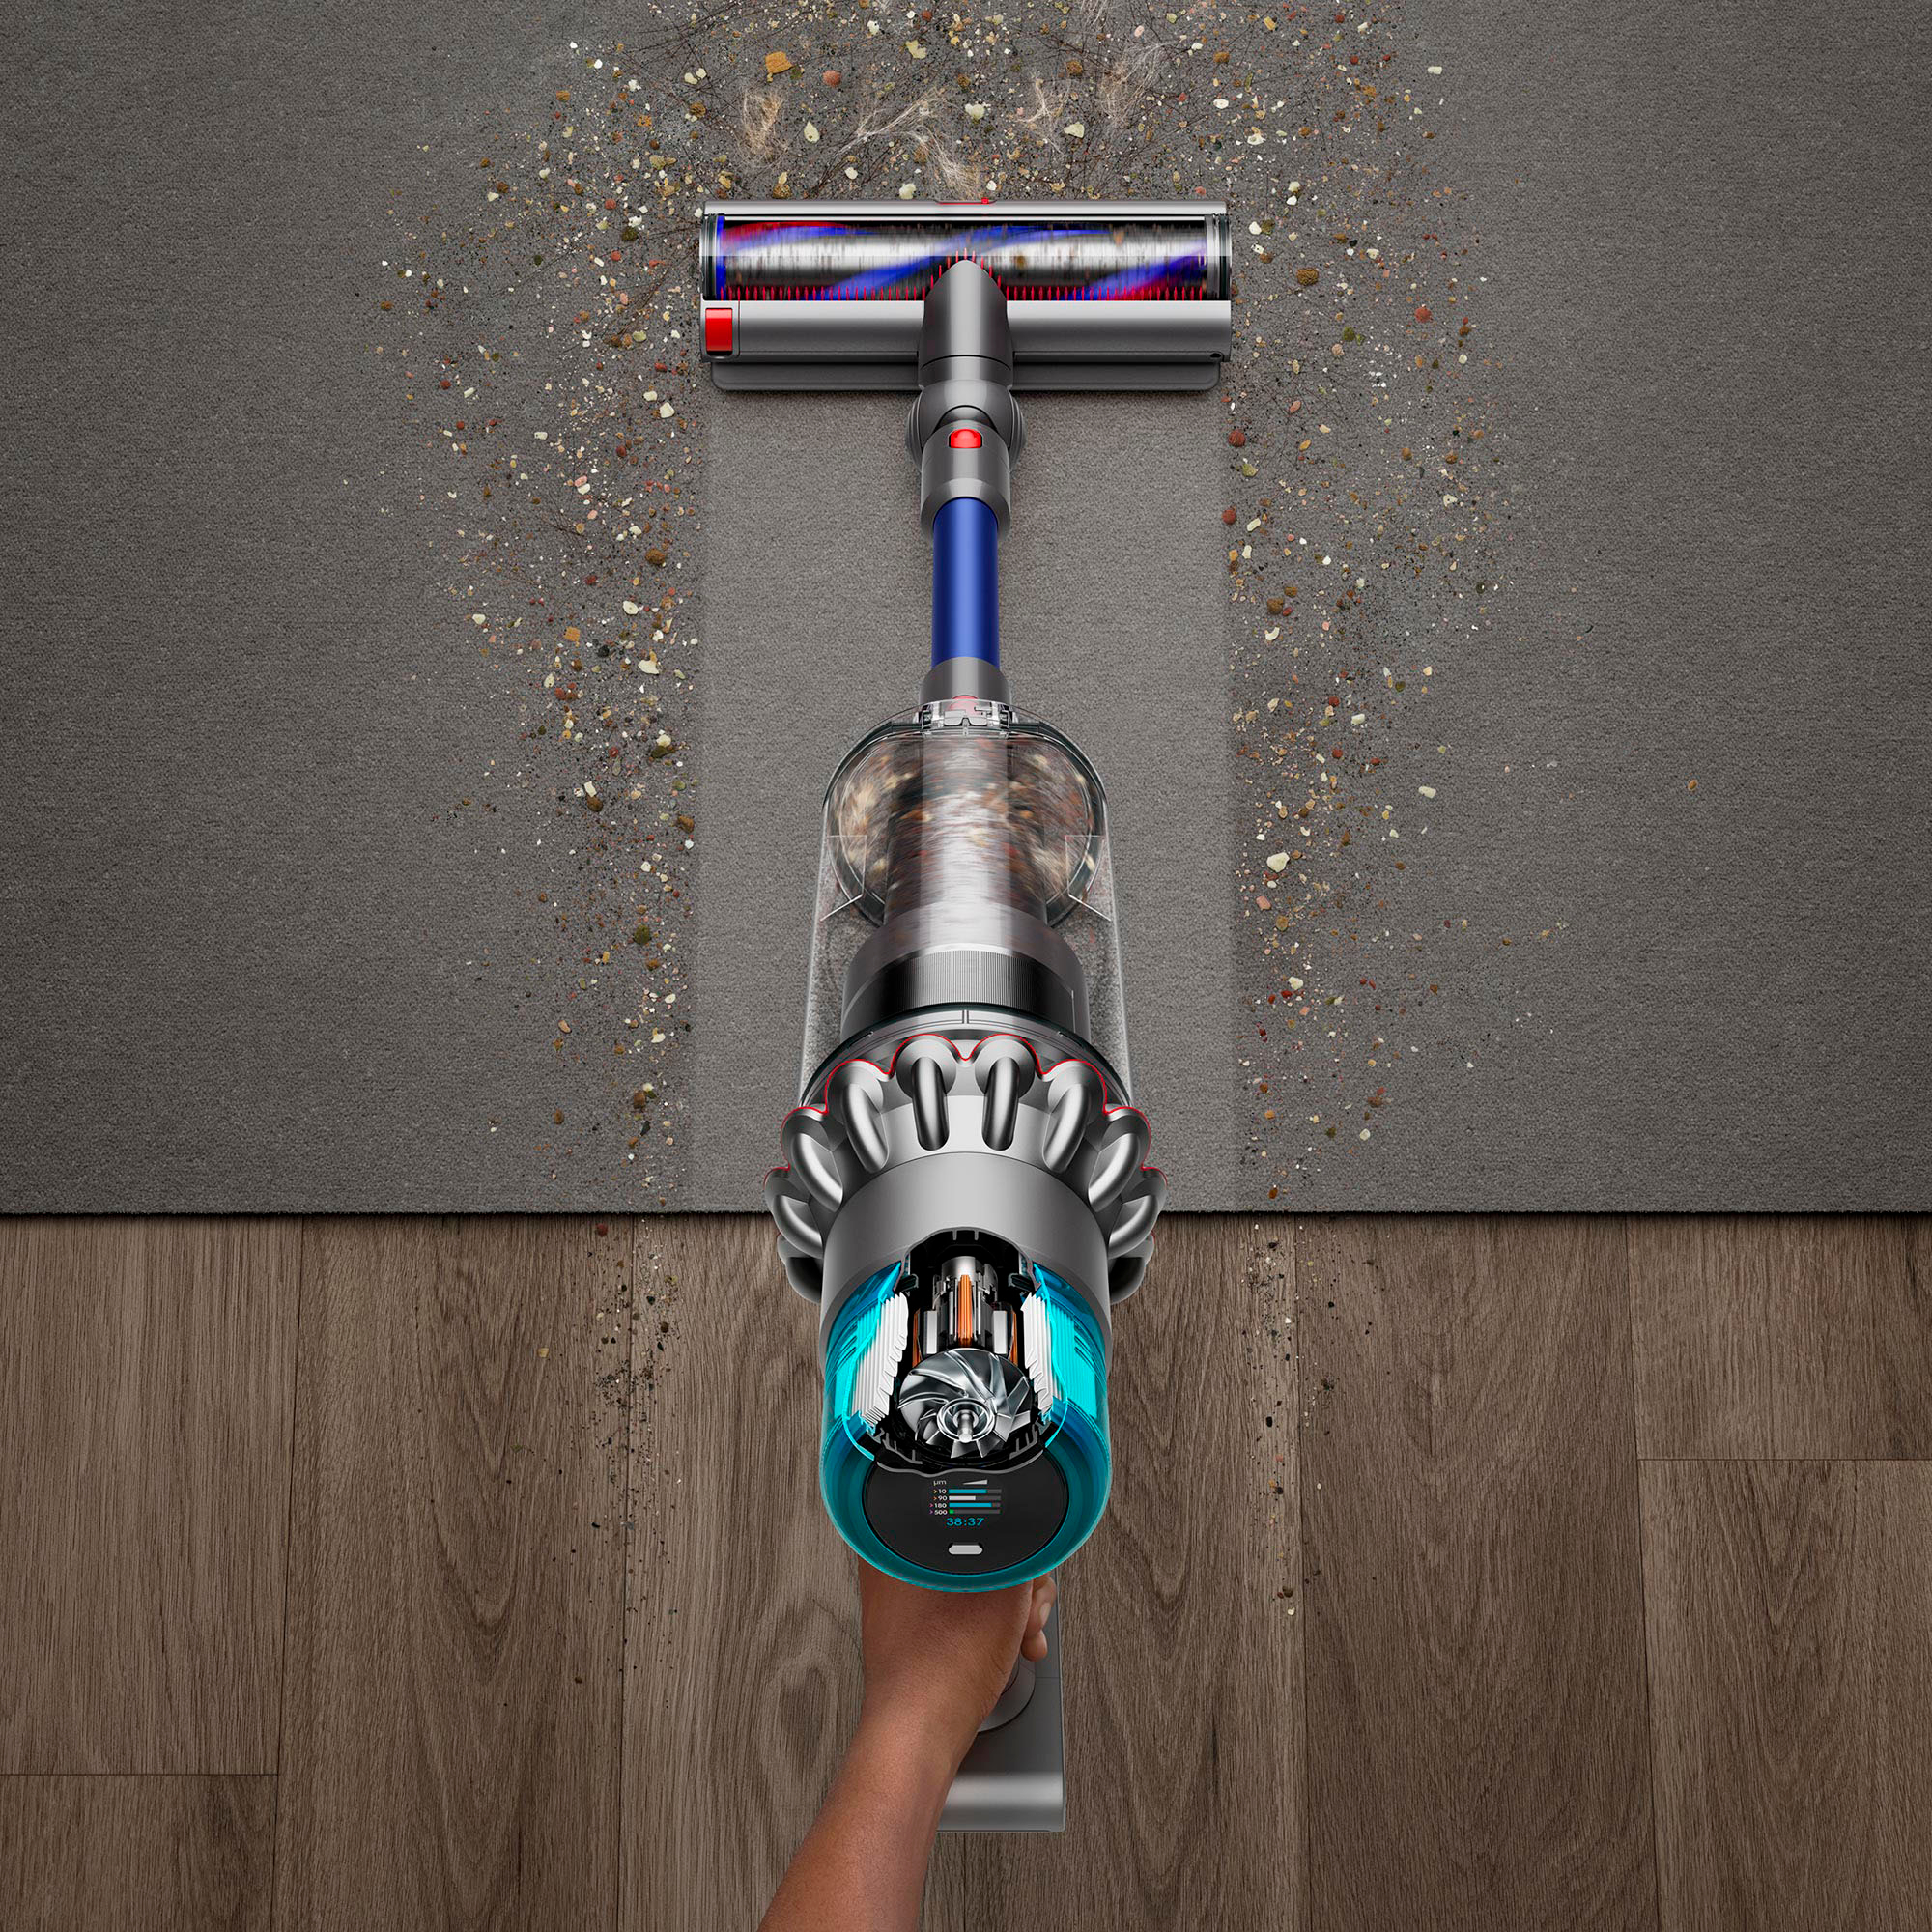 Dyson V8 Absolute Cordless Vacuum with 8 Tools & HEPA Filtration